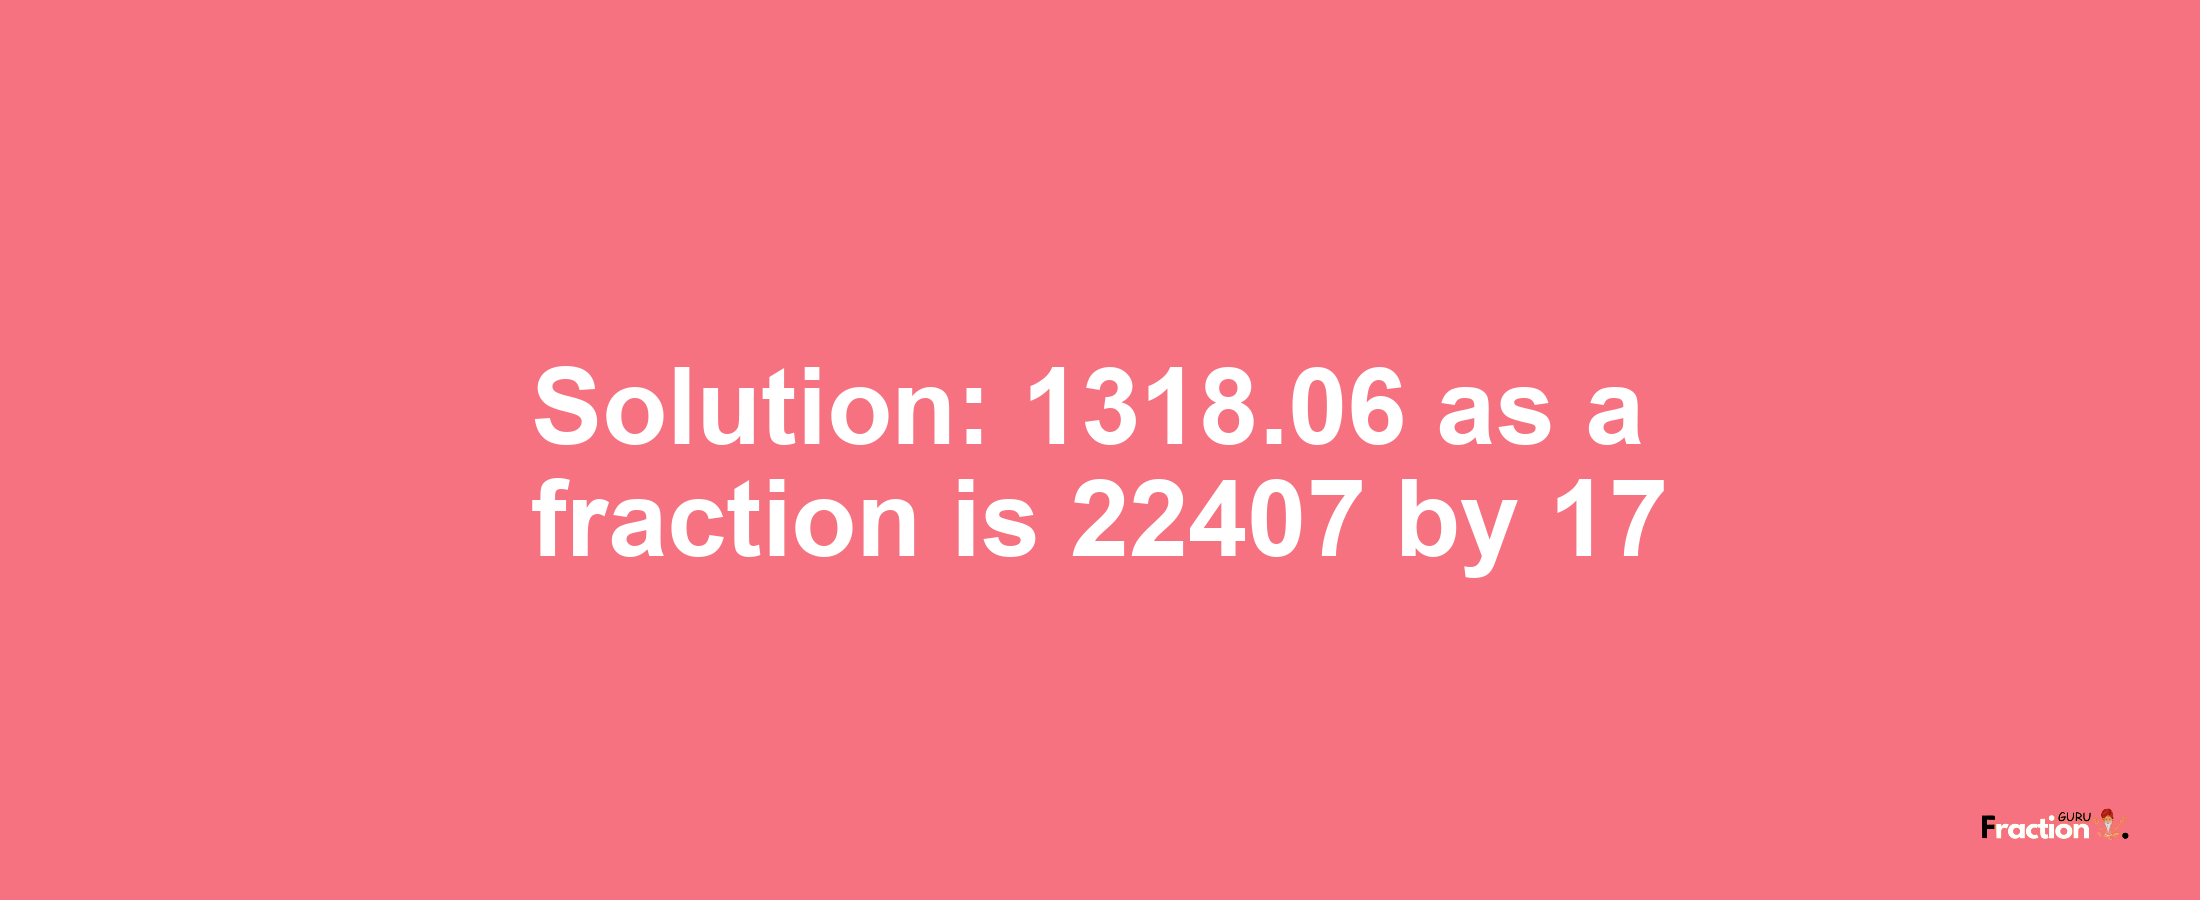 Solution:1318.06 as a fraction is 22407/17